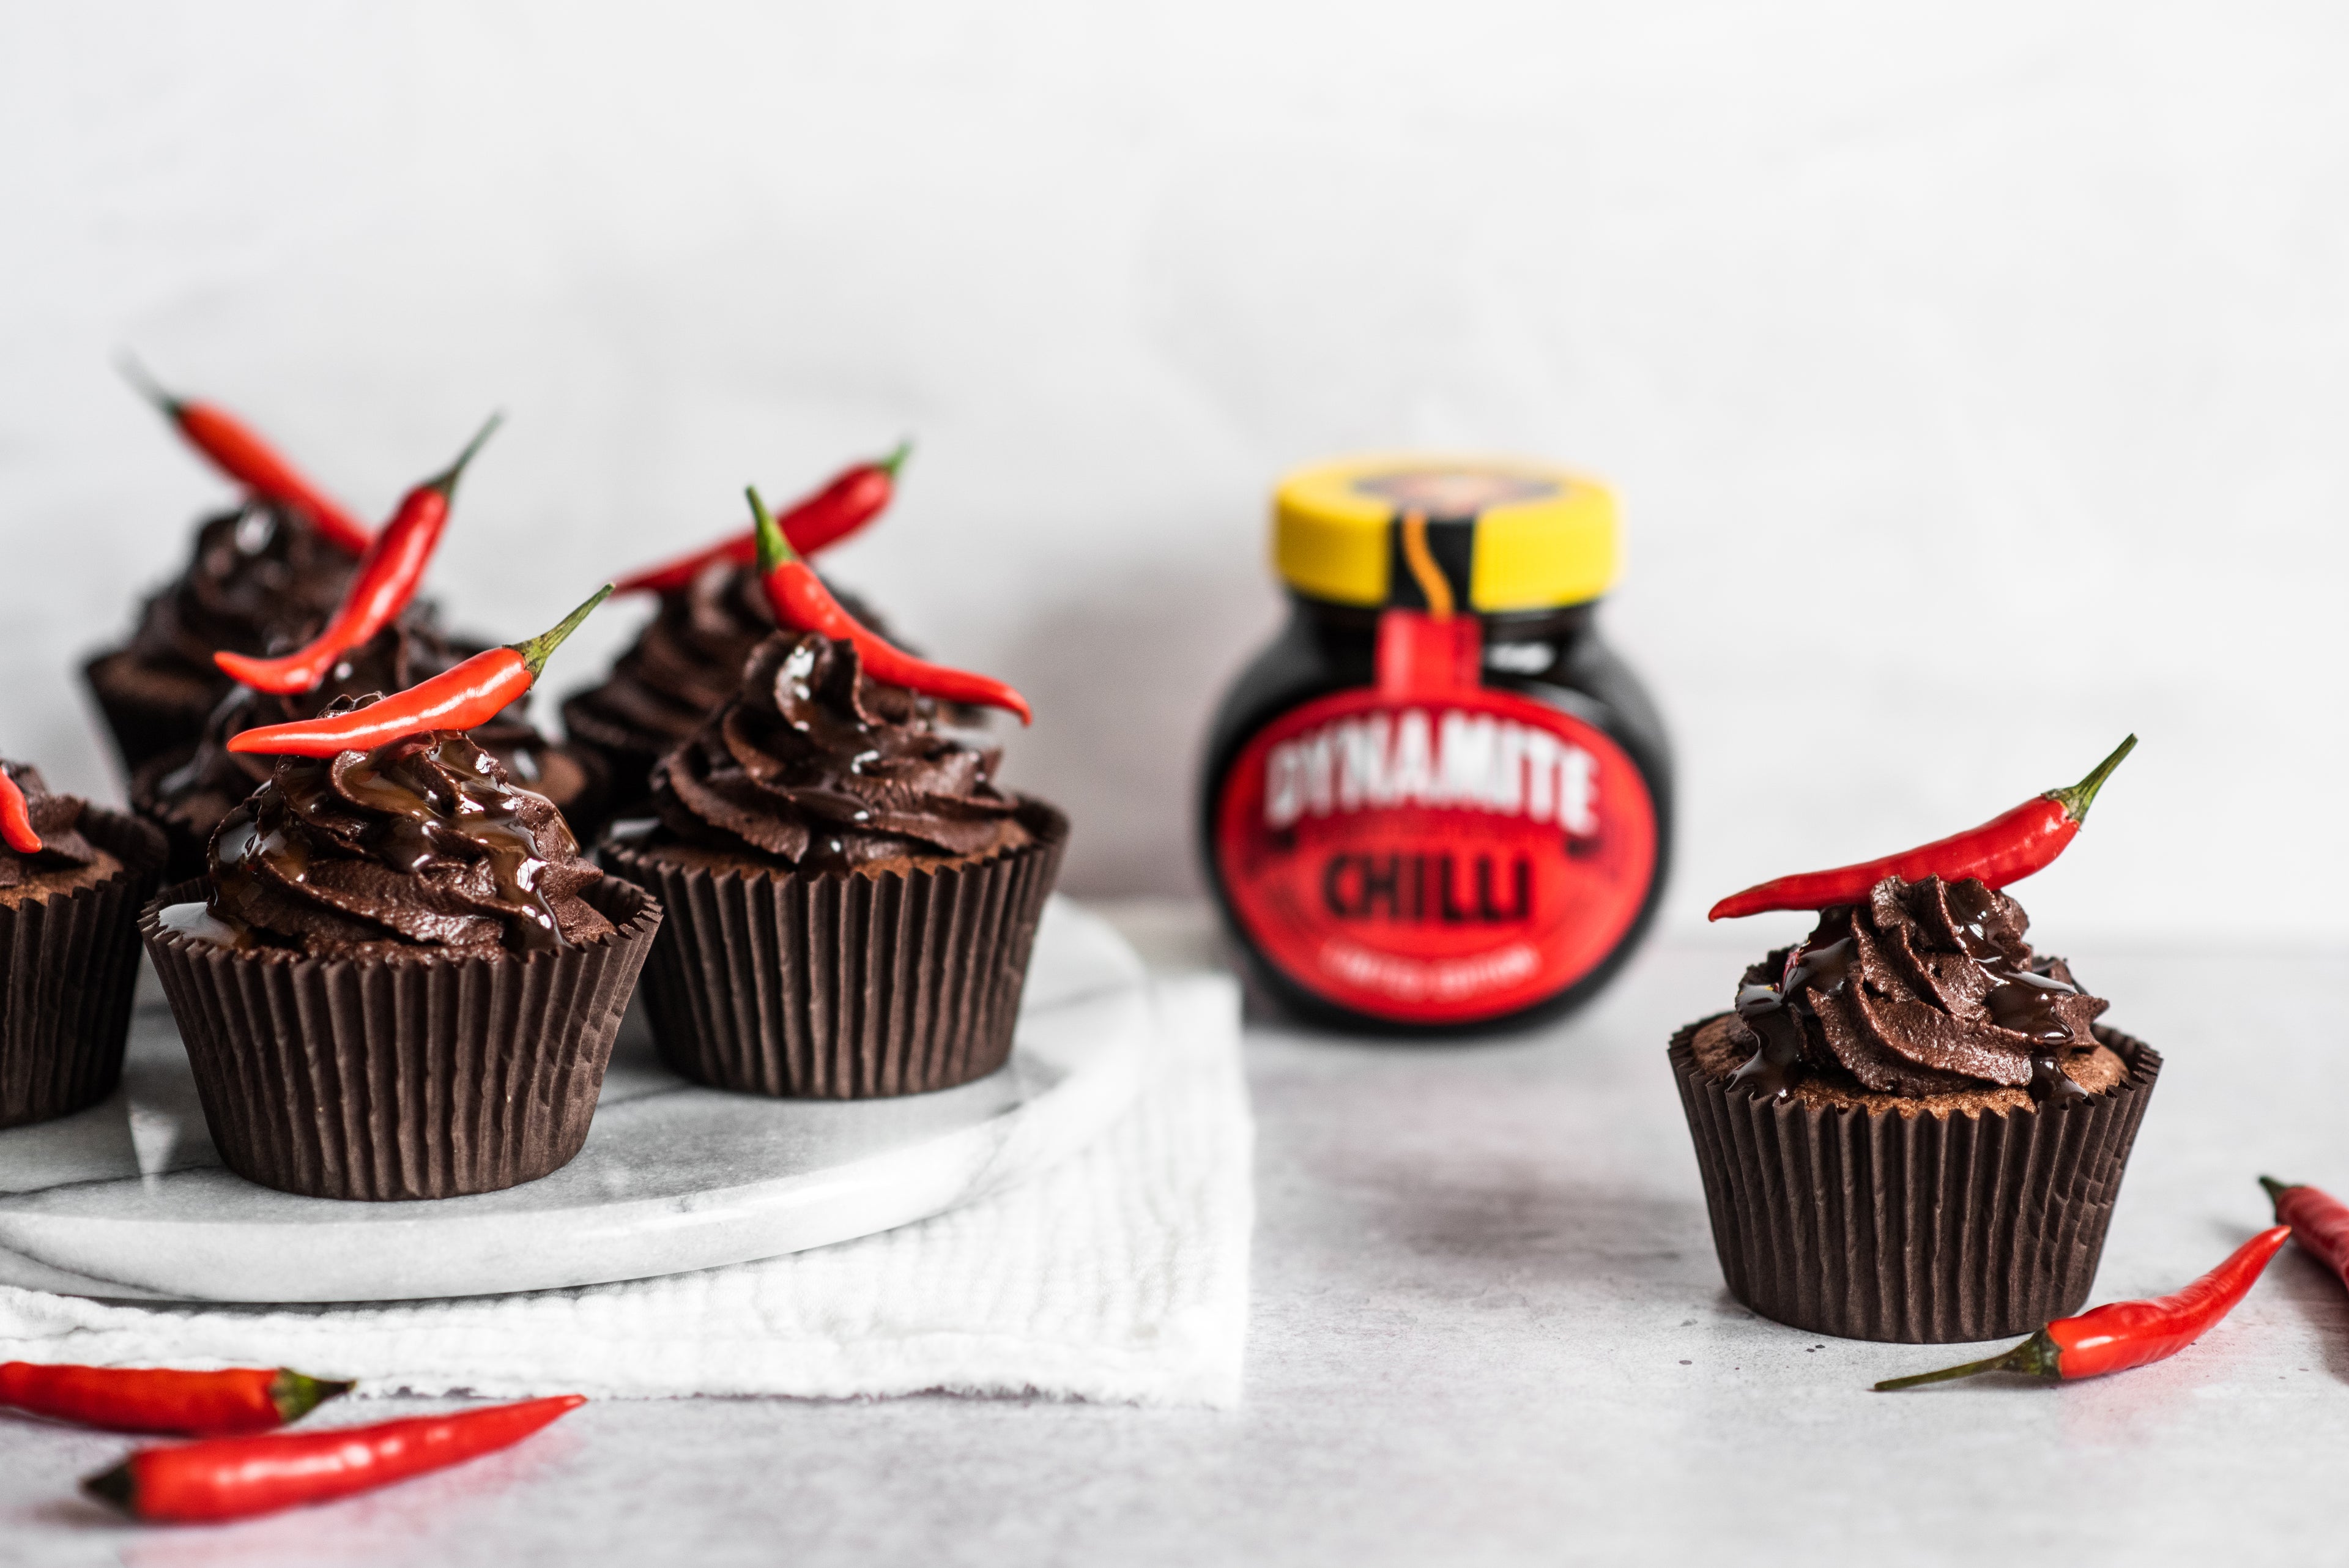 Chilli Chocolate Cupcakes with a chilli on top